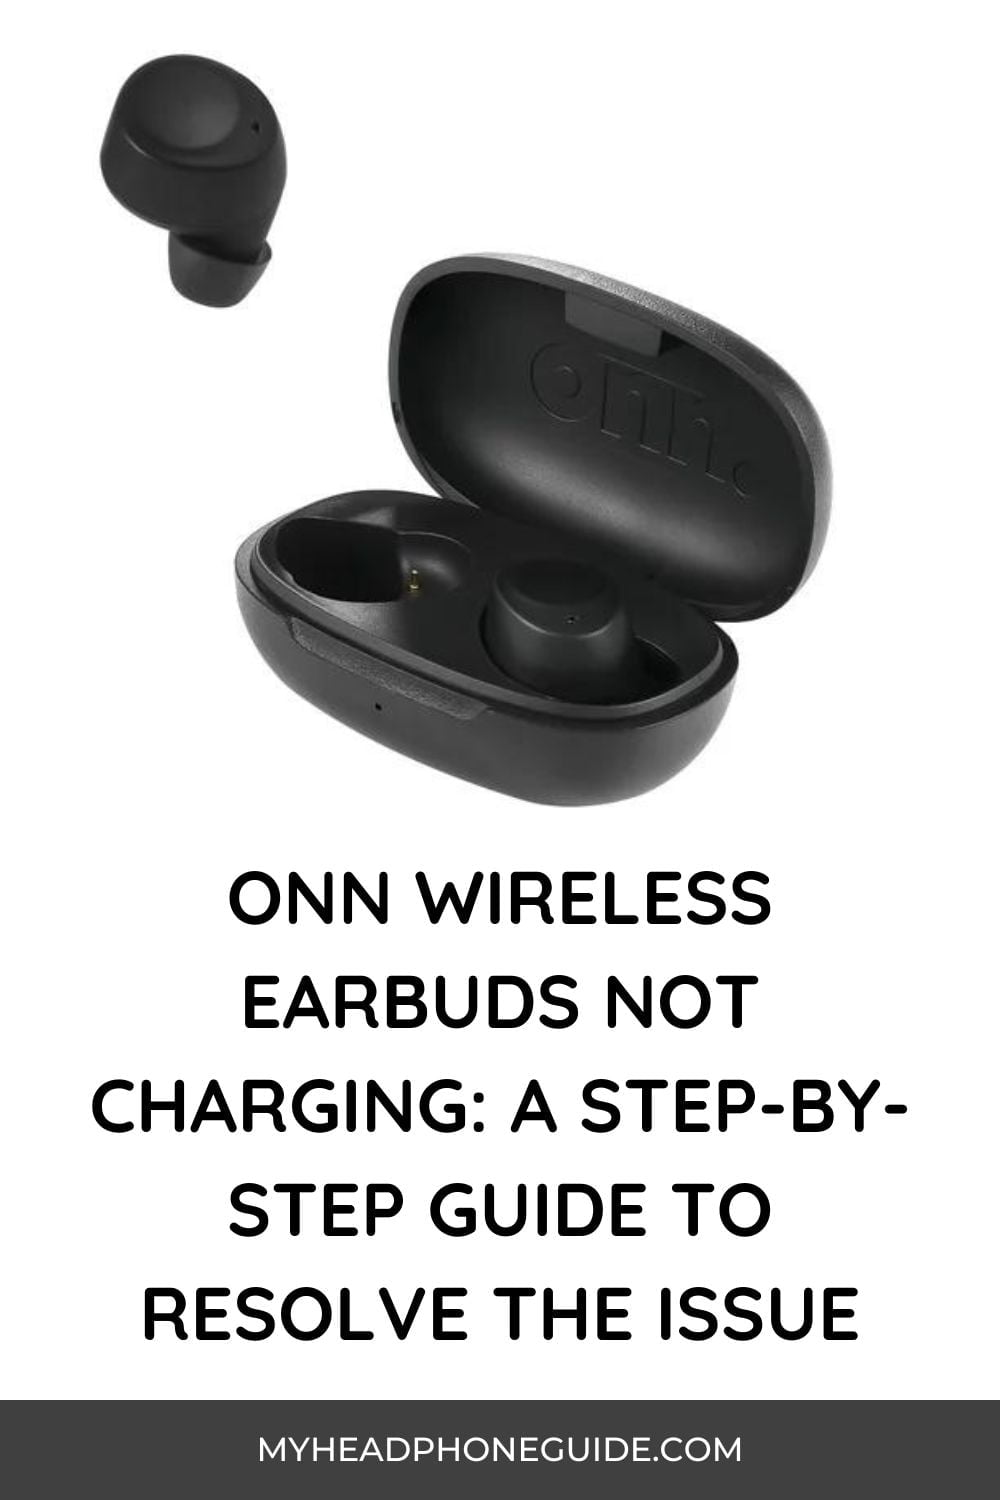 Onn Wireless Earbuds Not Charging: A Step-by-Step Guide to Resolve the Issue